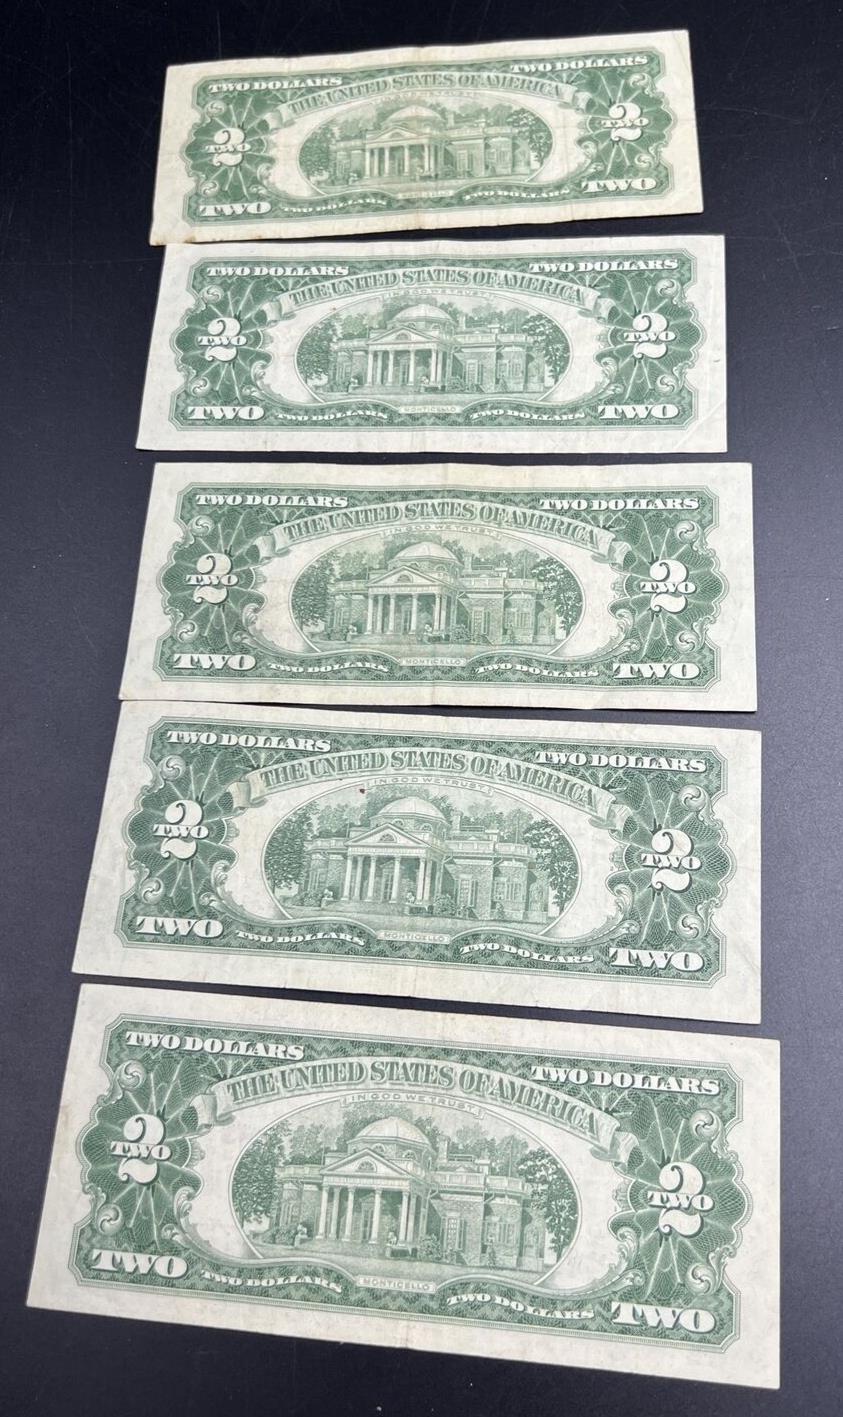 Lot of 5 1963 $2 US Two Dollar Currency Legal Tender Note Red Seal Bills VG+ #76